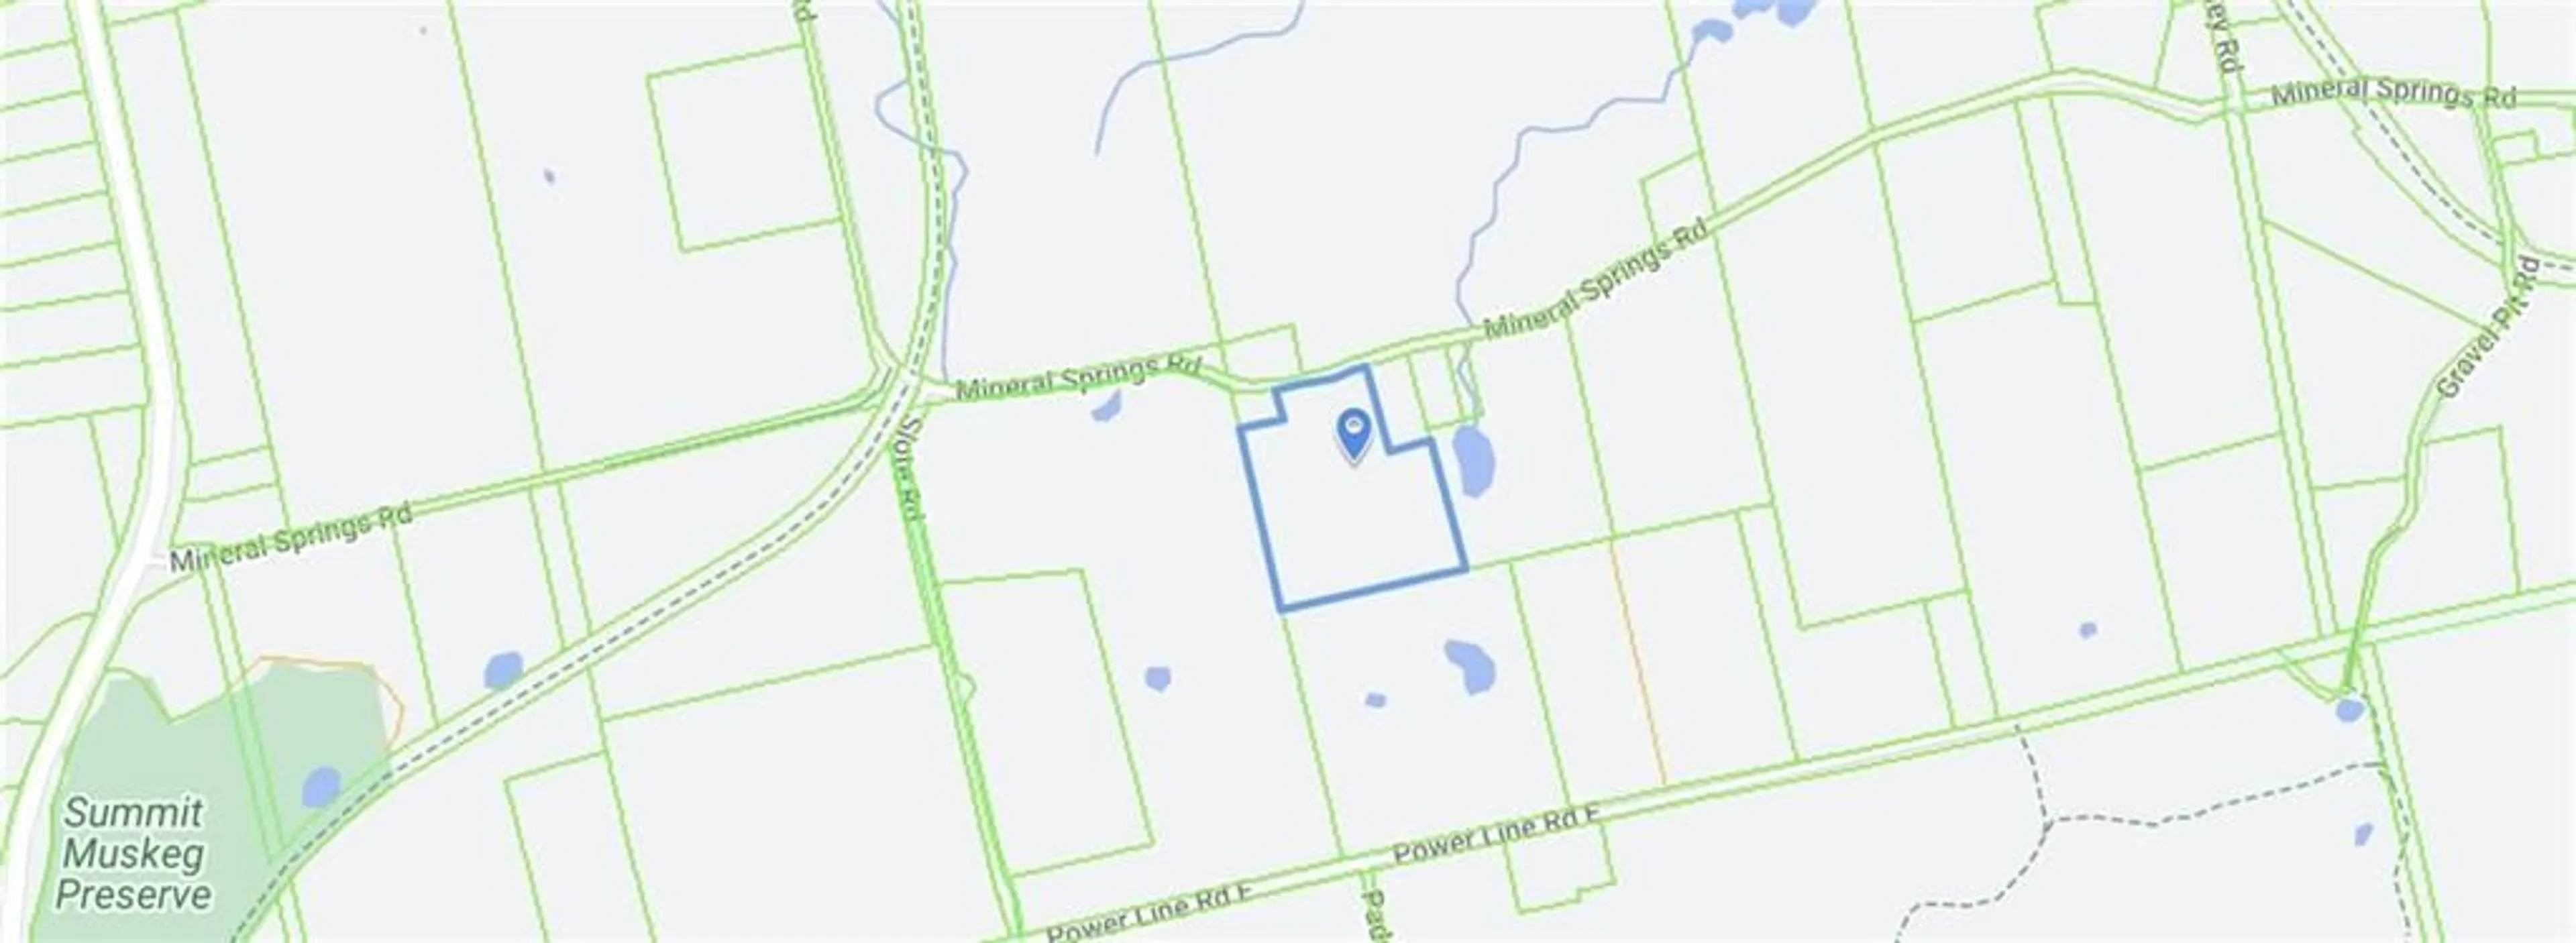 Picture of a map for 1580 Mineral Springs Rd, Ancaster Ontario L9H 5E3